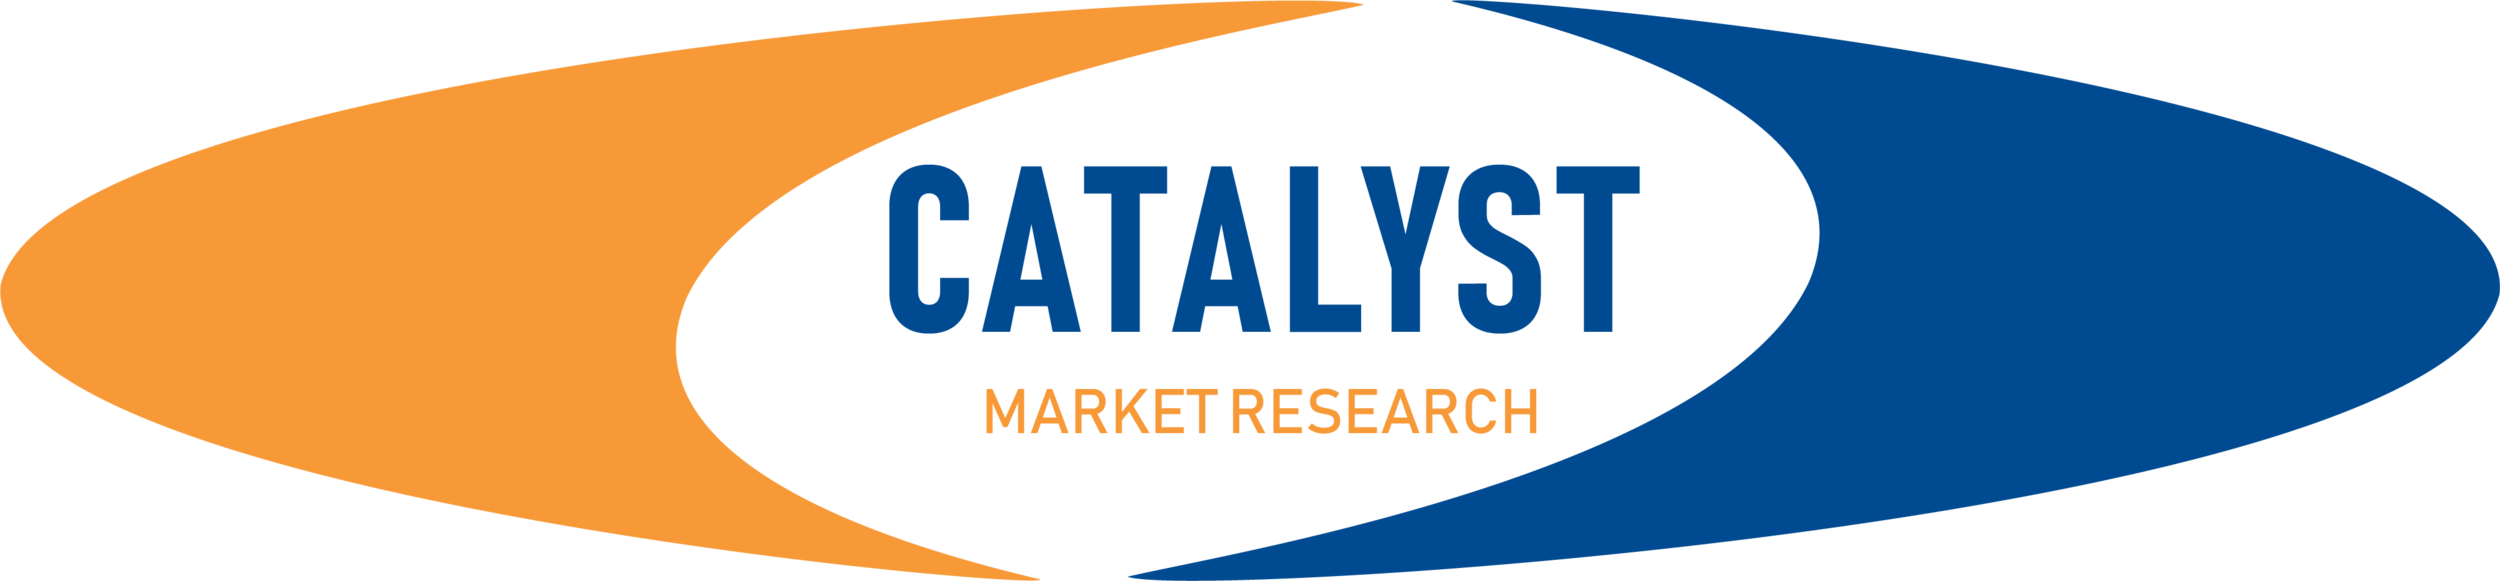 Catalyst Market Research